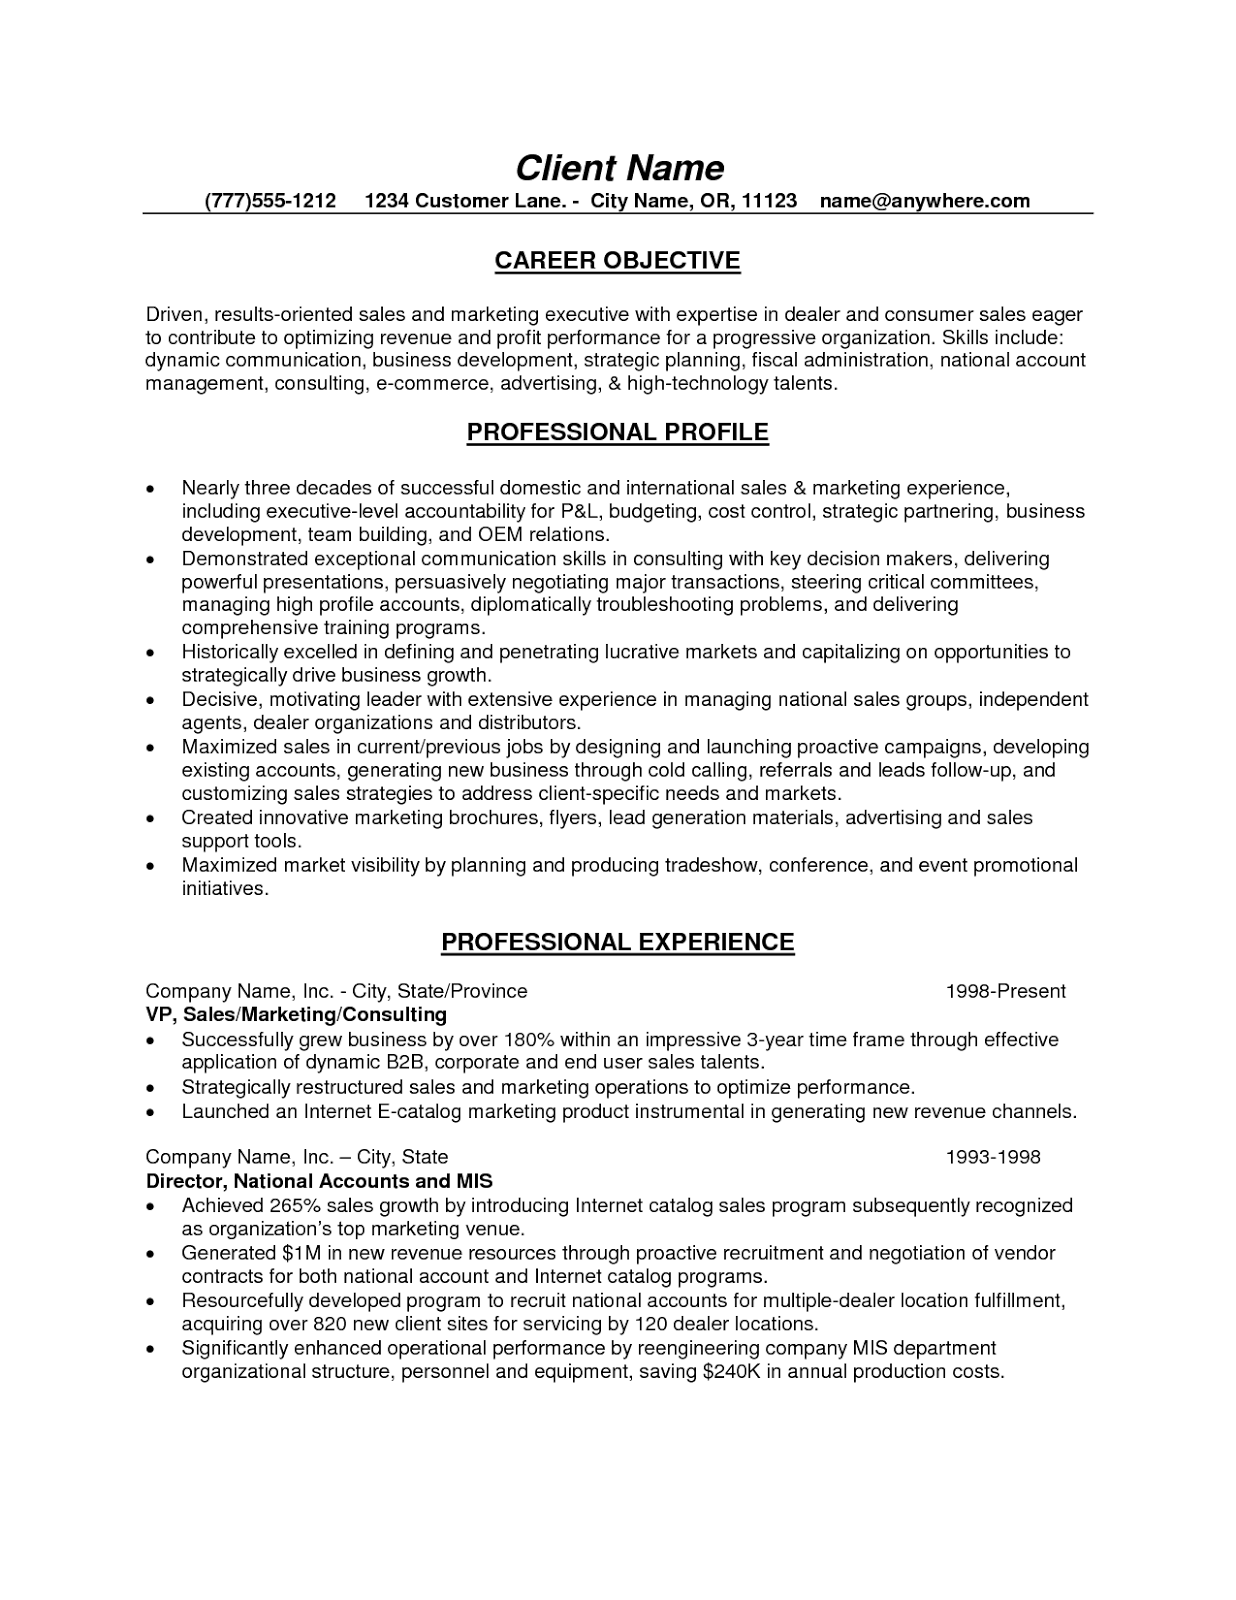 Describe Personal/Engineering Interests and Career Goals